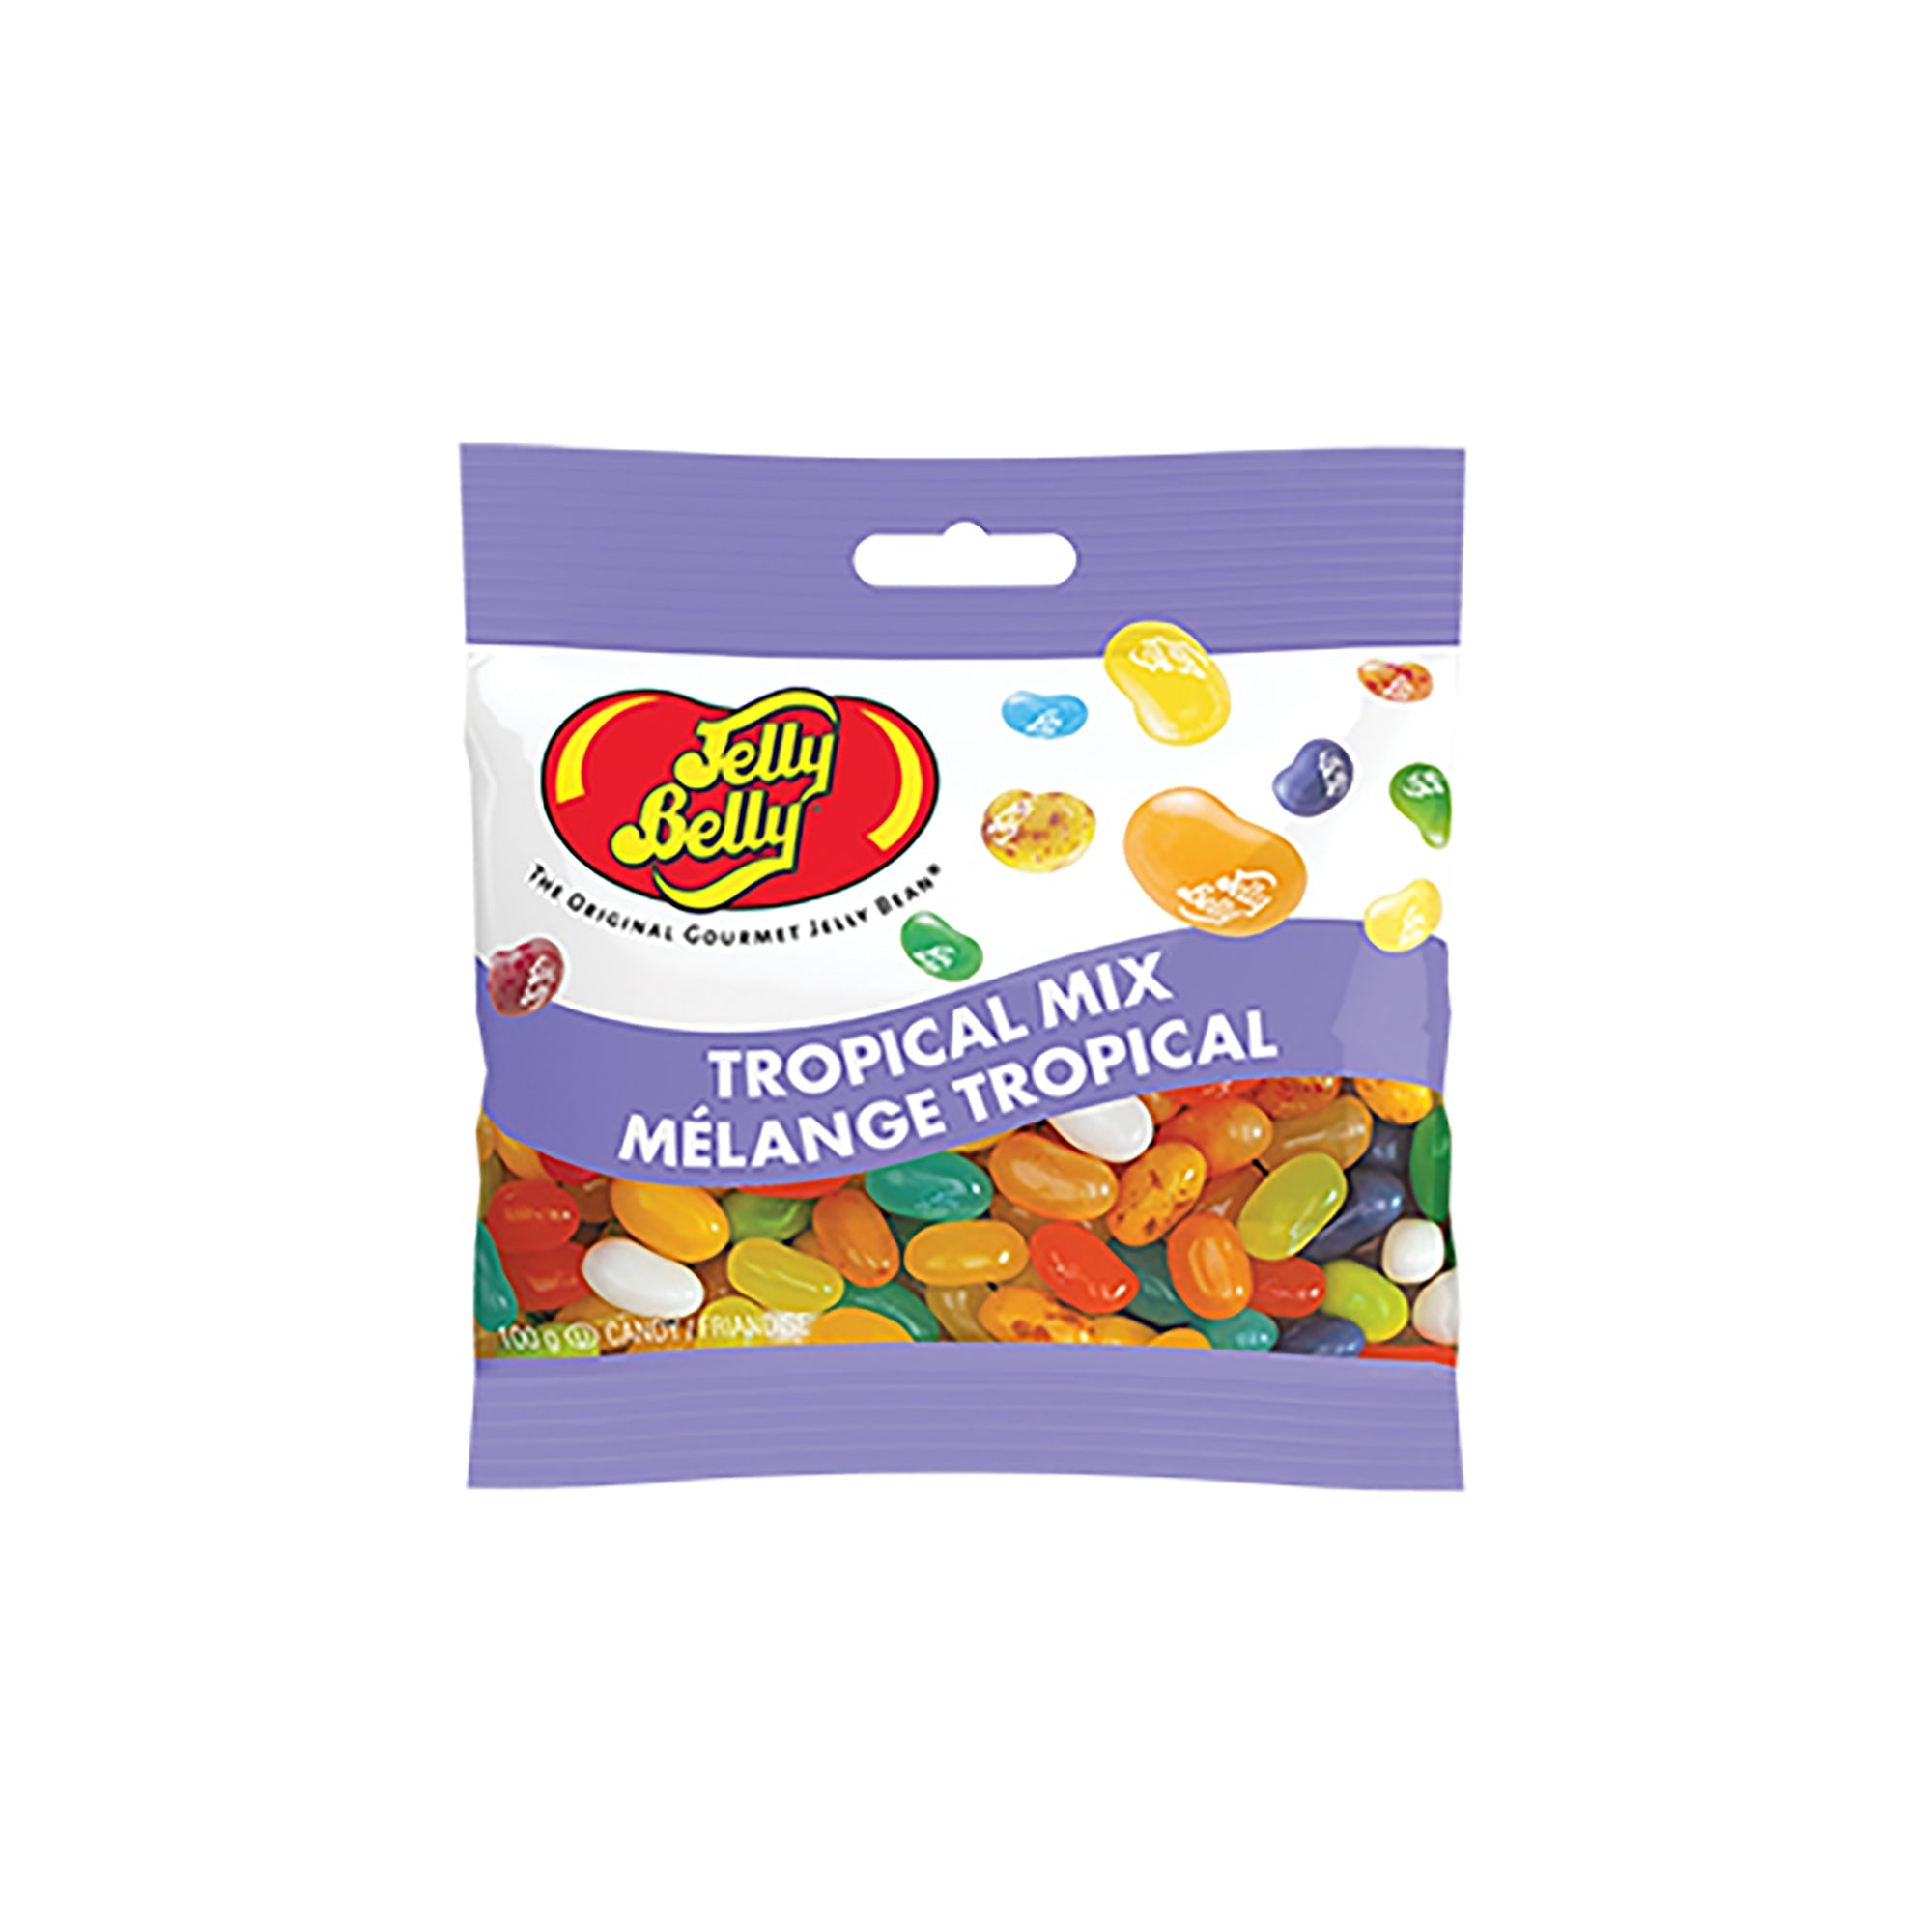 Jelly Belly Tropical Mix Jelly Bean Candy 100g